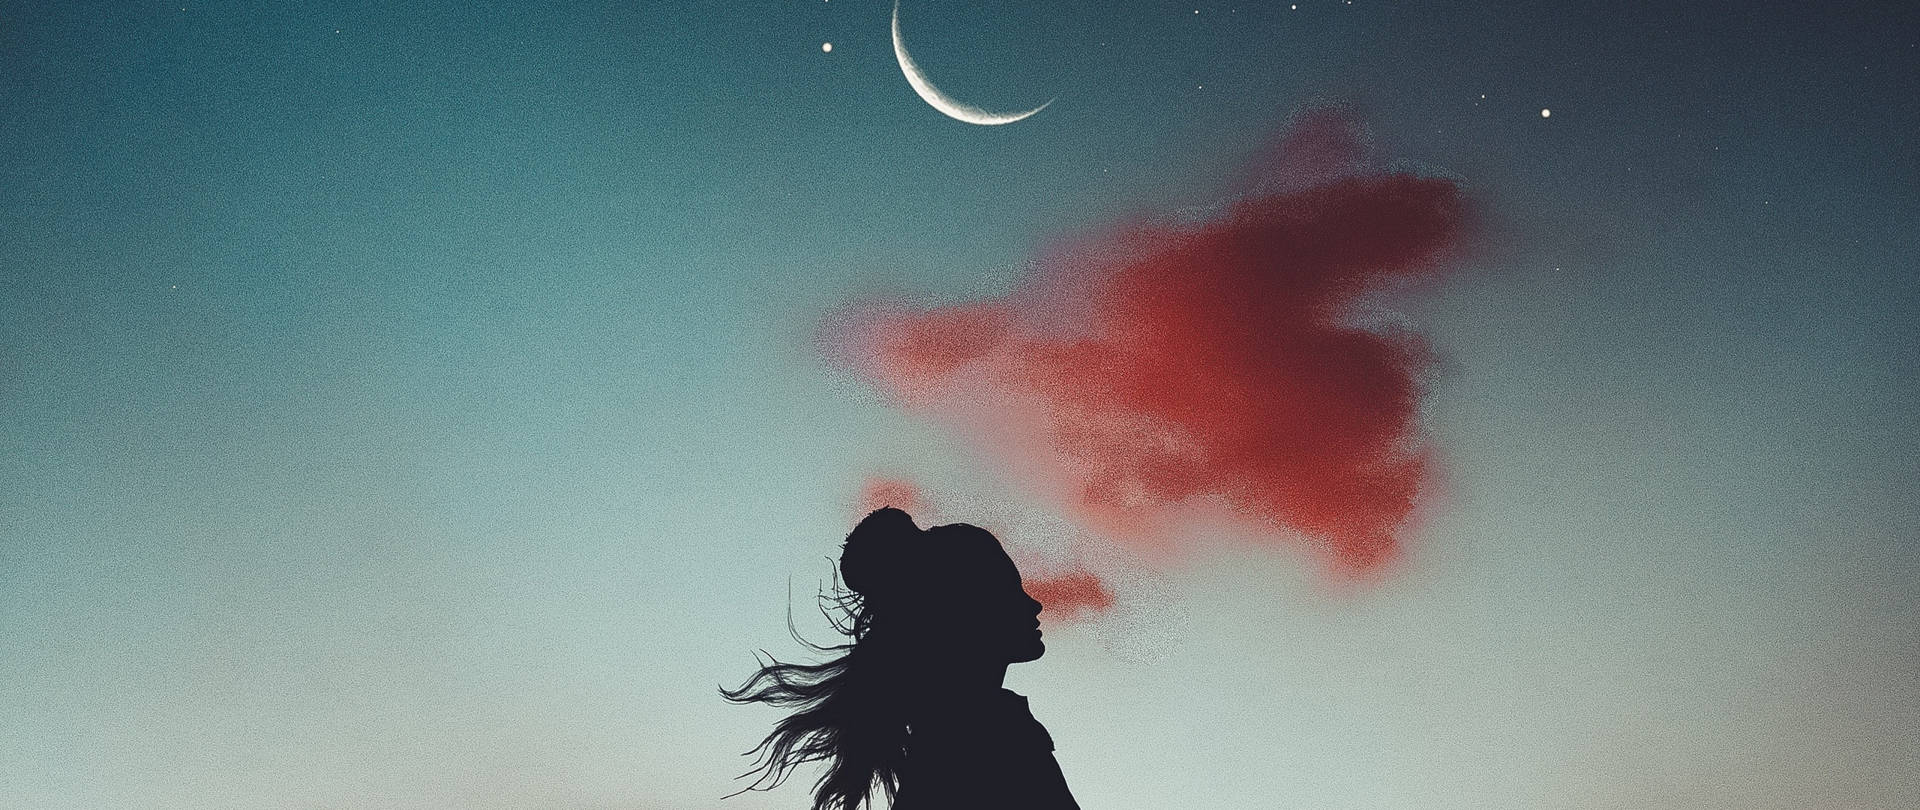 Moon 4k Girl And Red Cloud Background